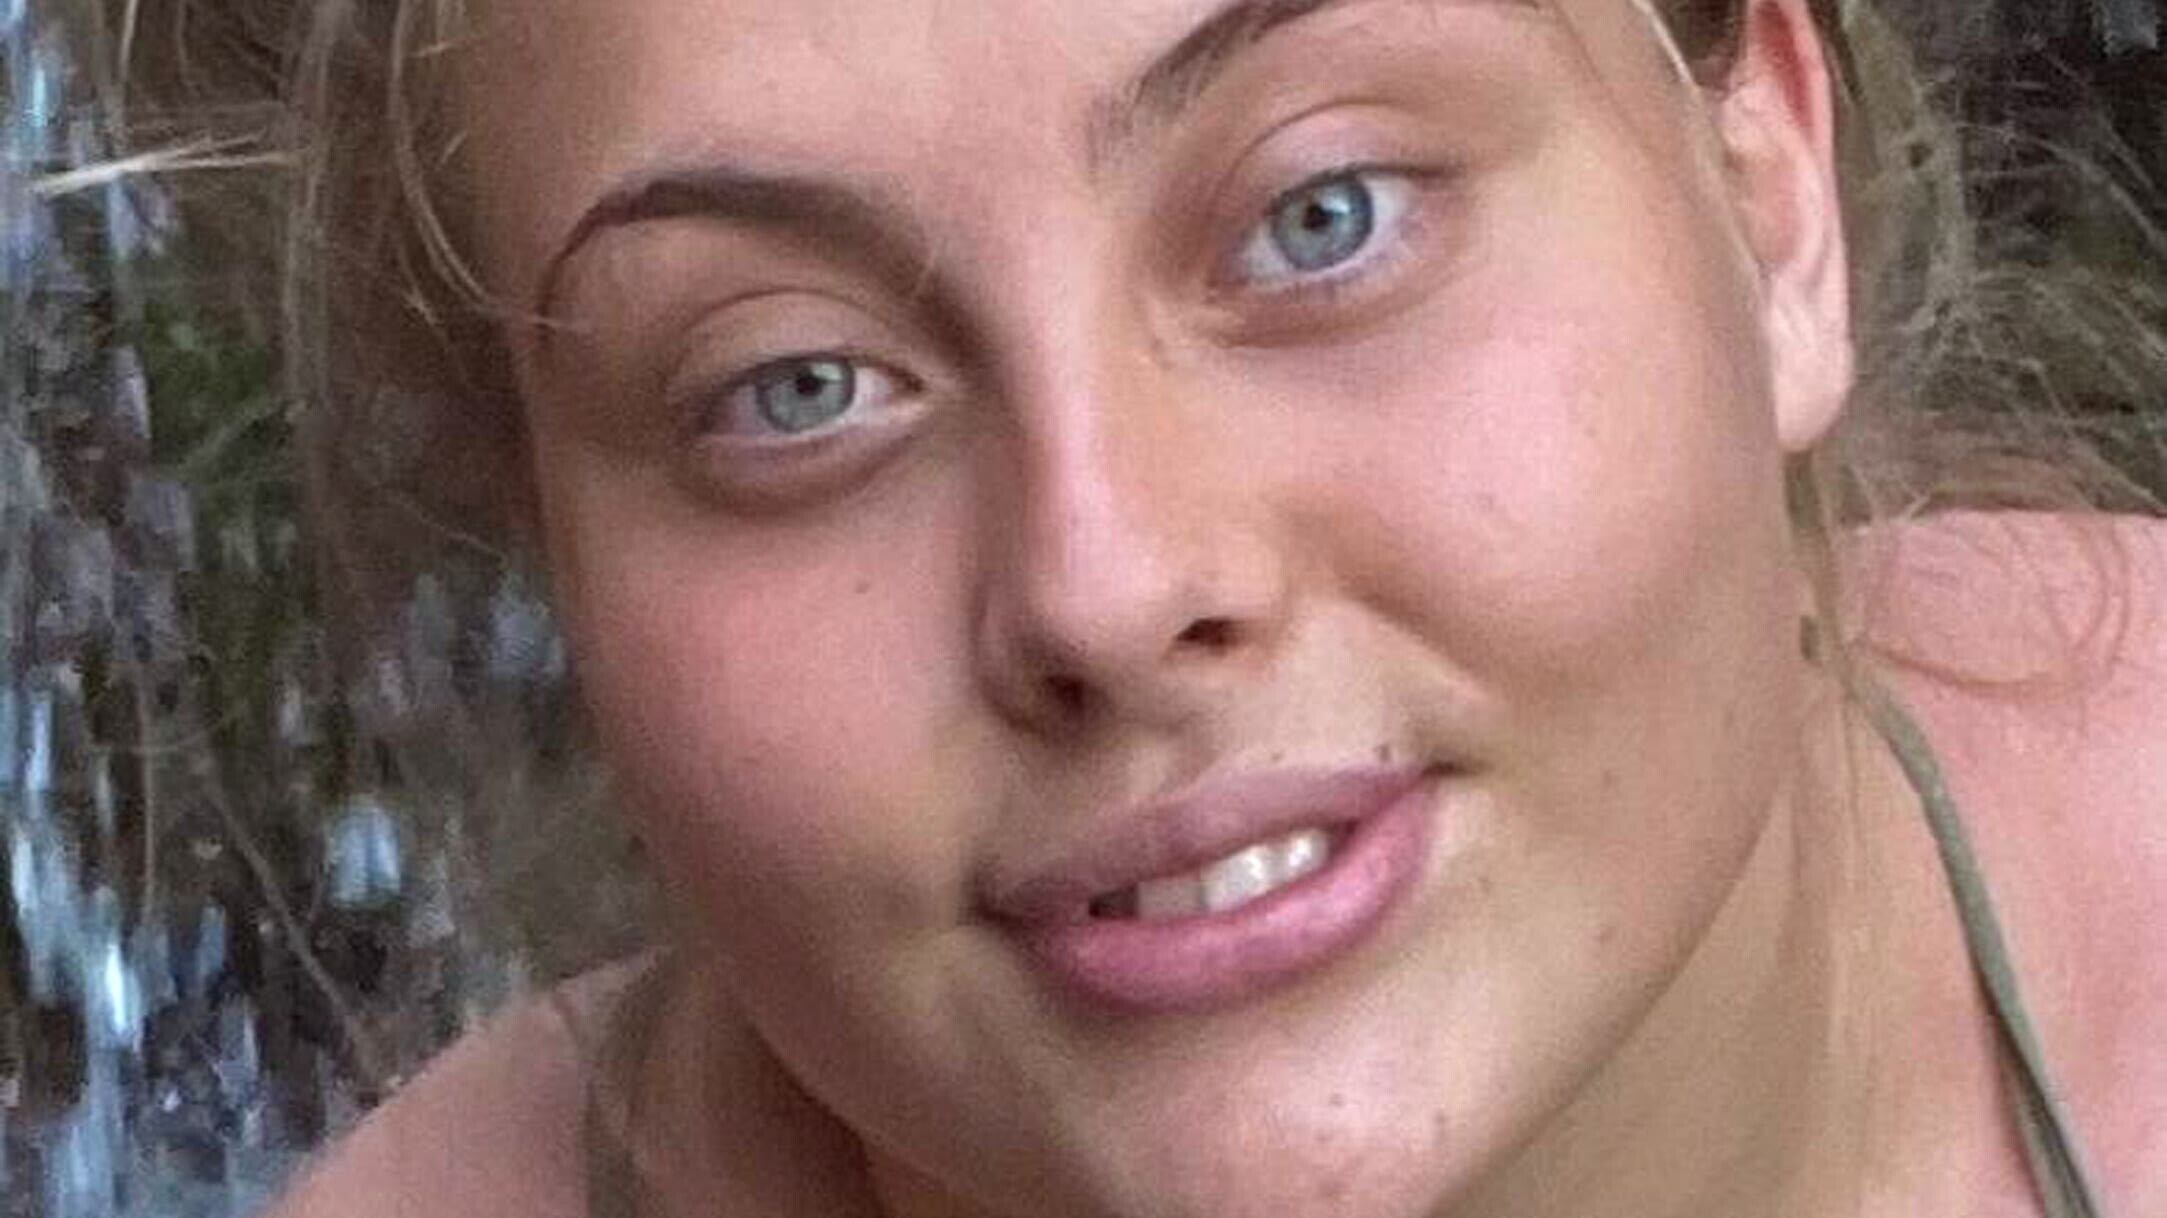 Chloe Hayman, 17, from Mountain Ash, was killed in a collision in July last year (Family handout/PA)